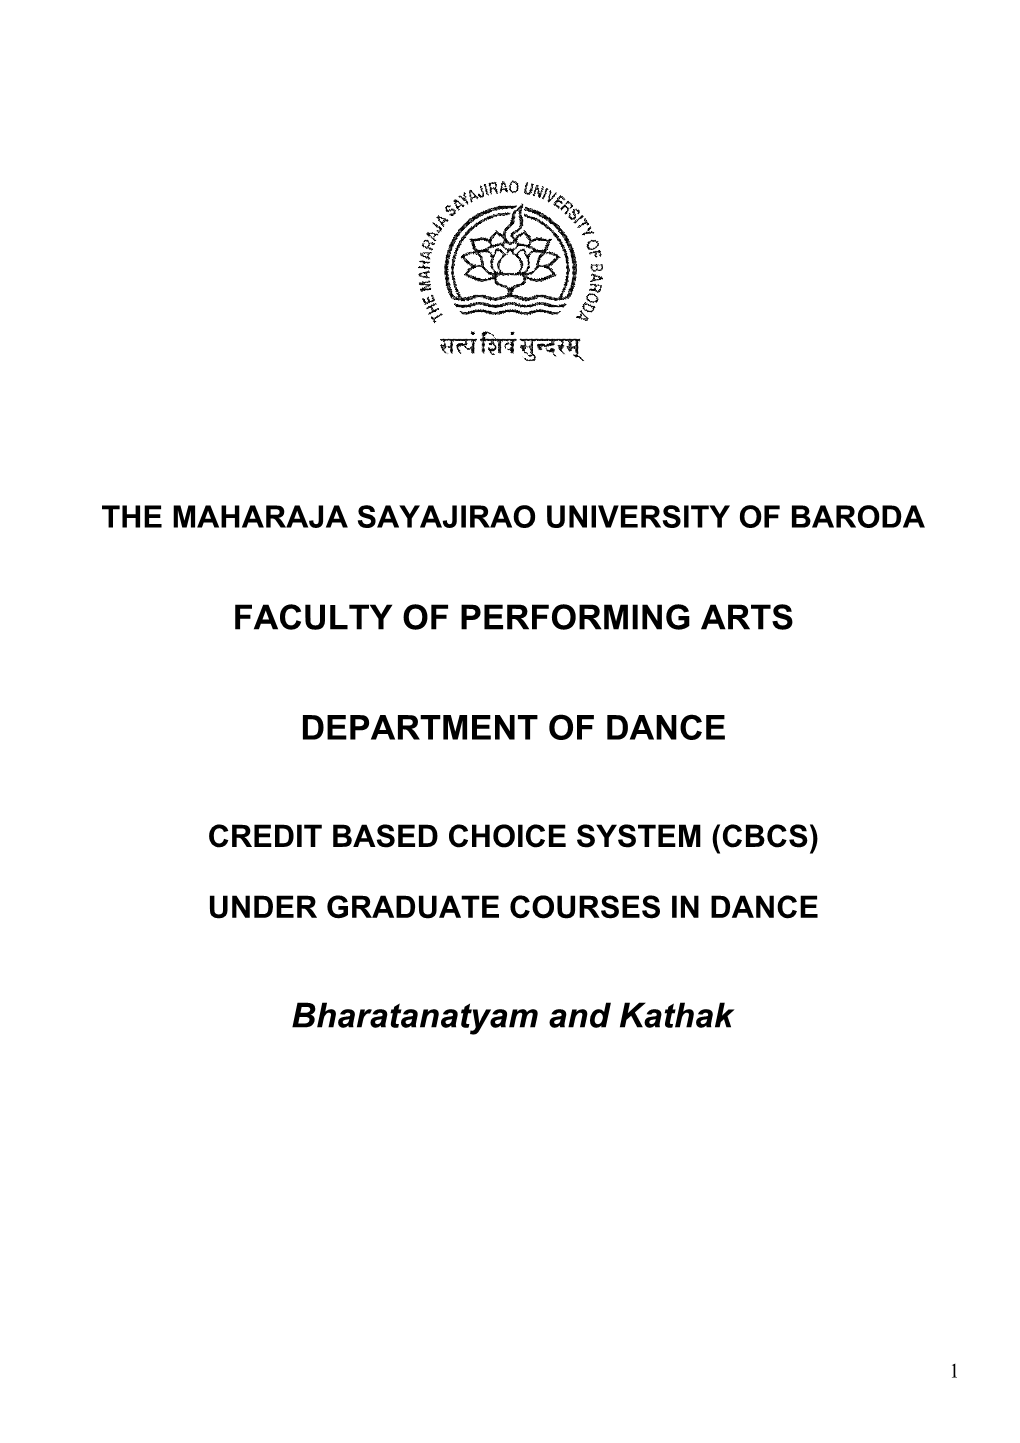 Degree Courses in Dance